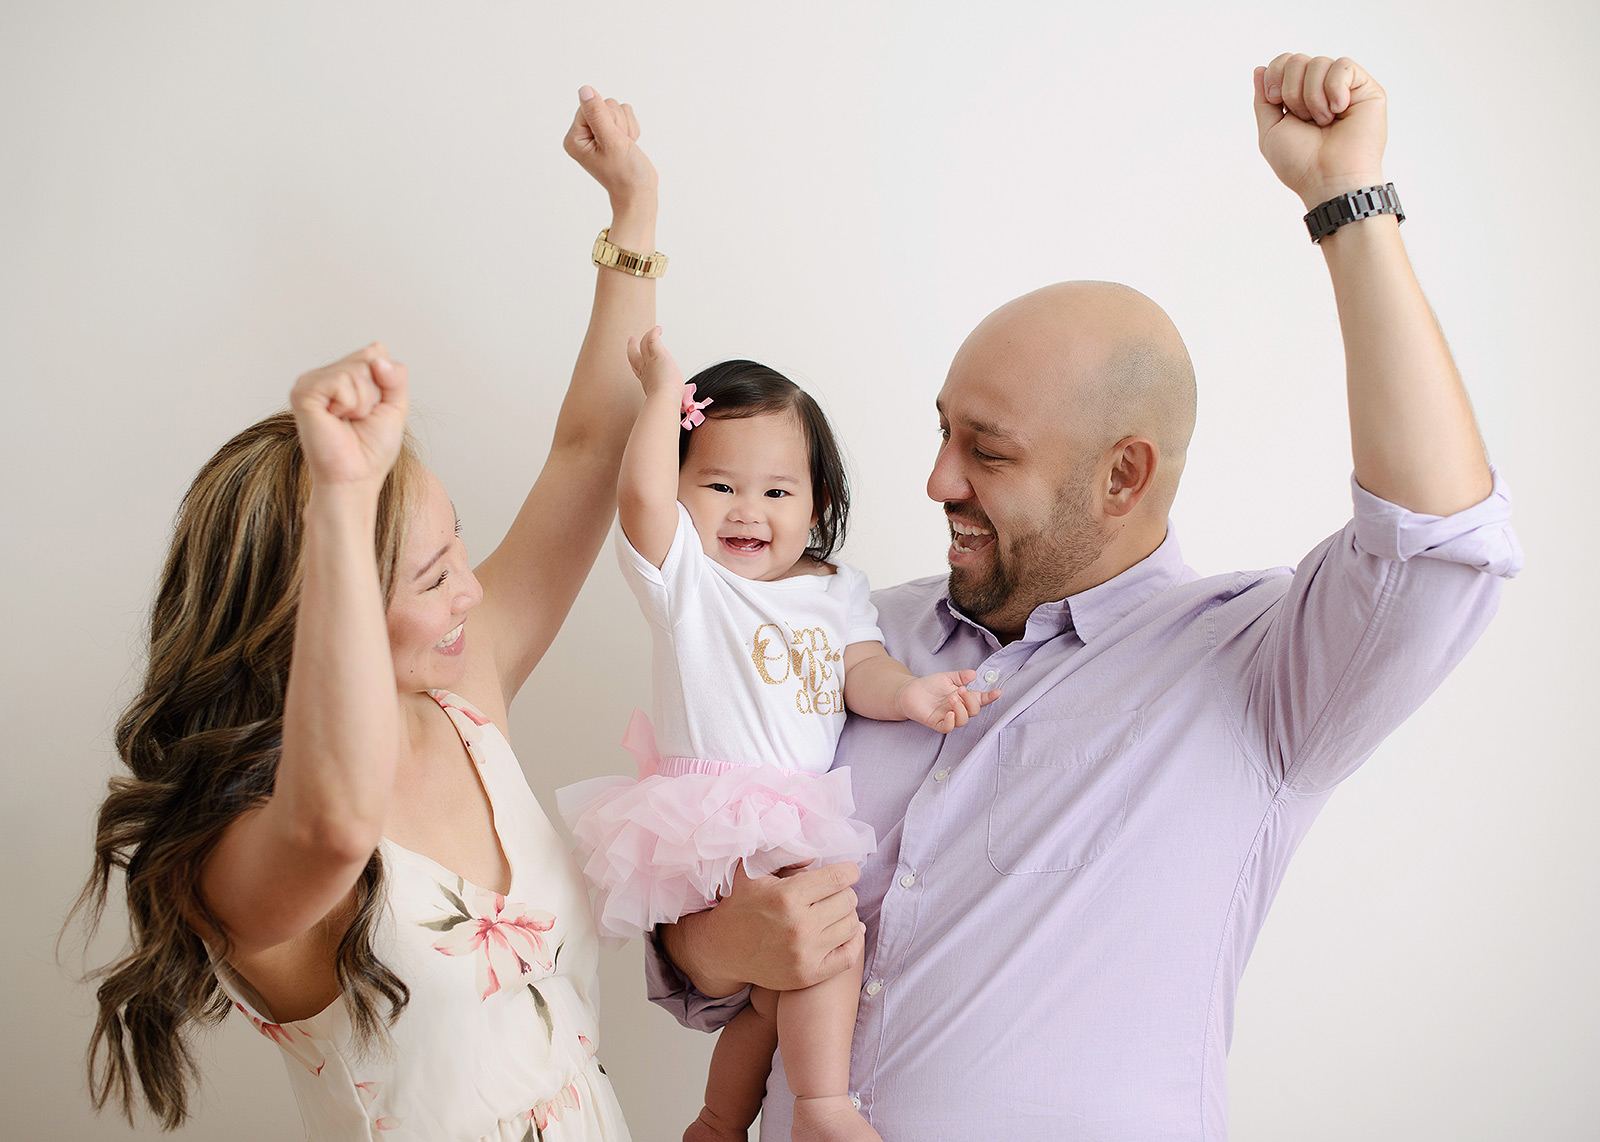 Family putting fists up to celebrate one year old baby girl's birthday